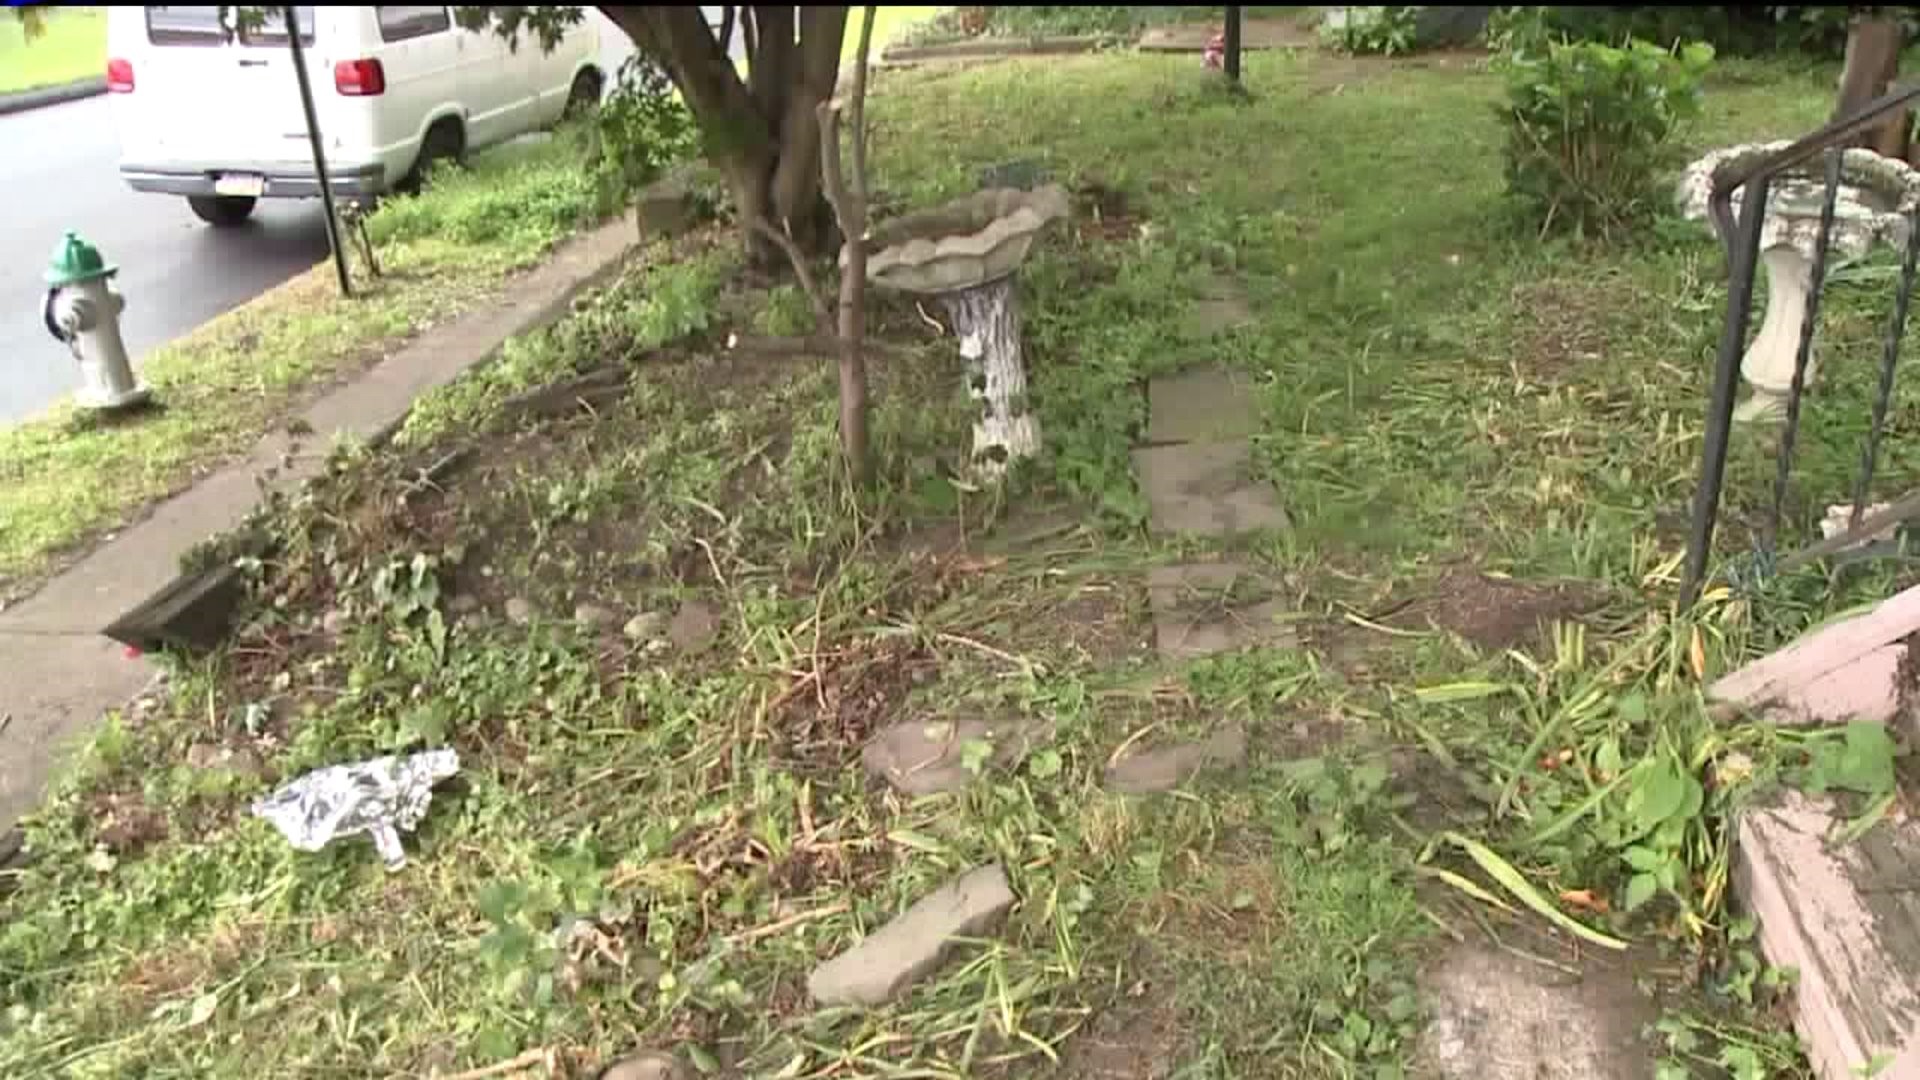 Woman's Garden Mistakenly Destroyed, City Vows to Replant